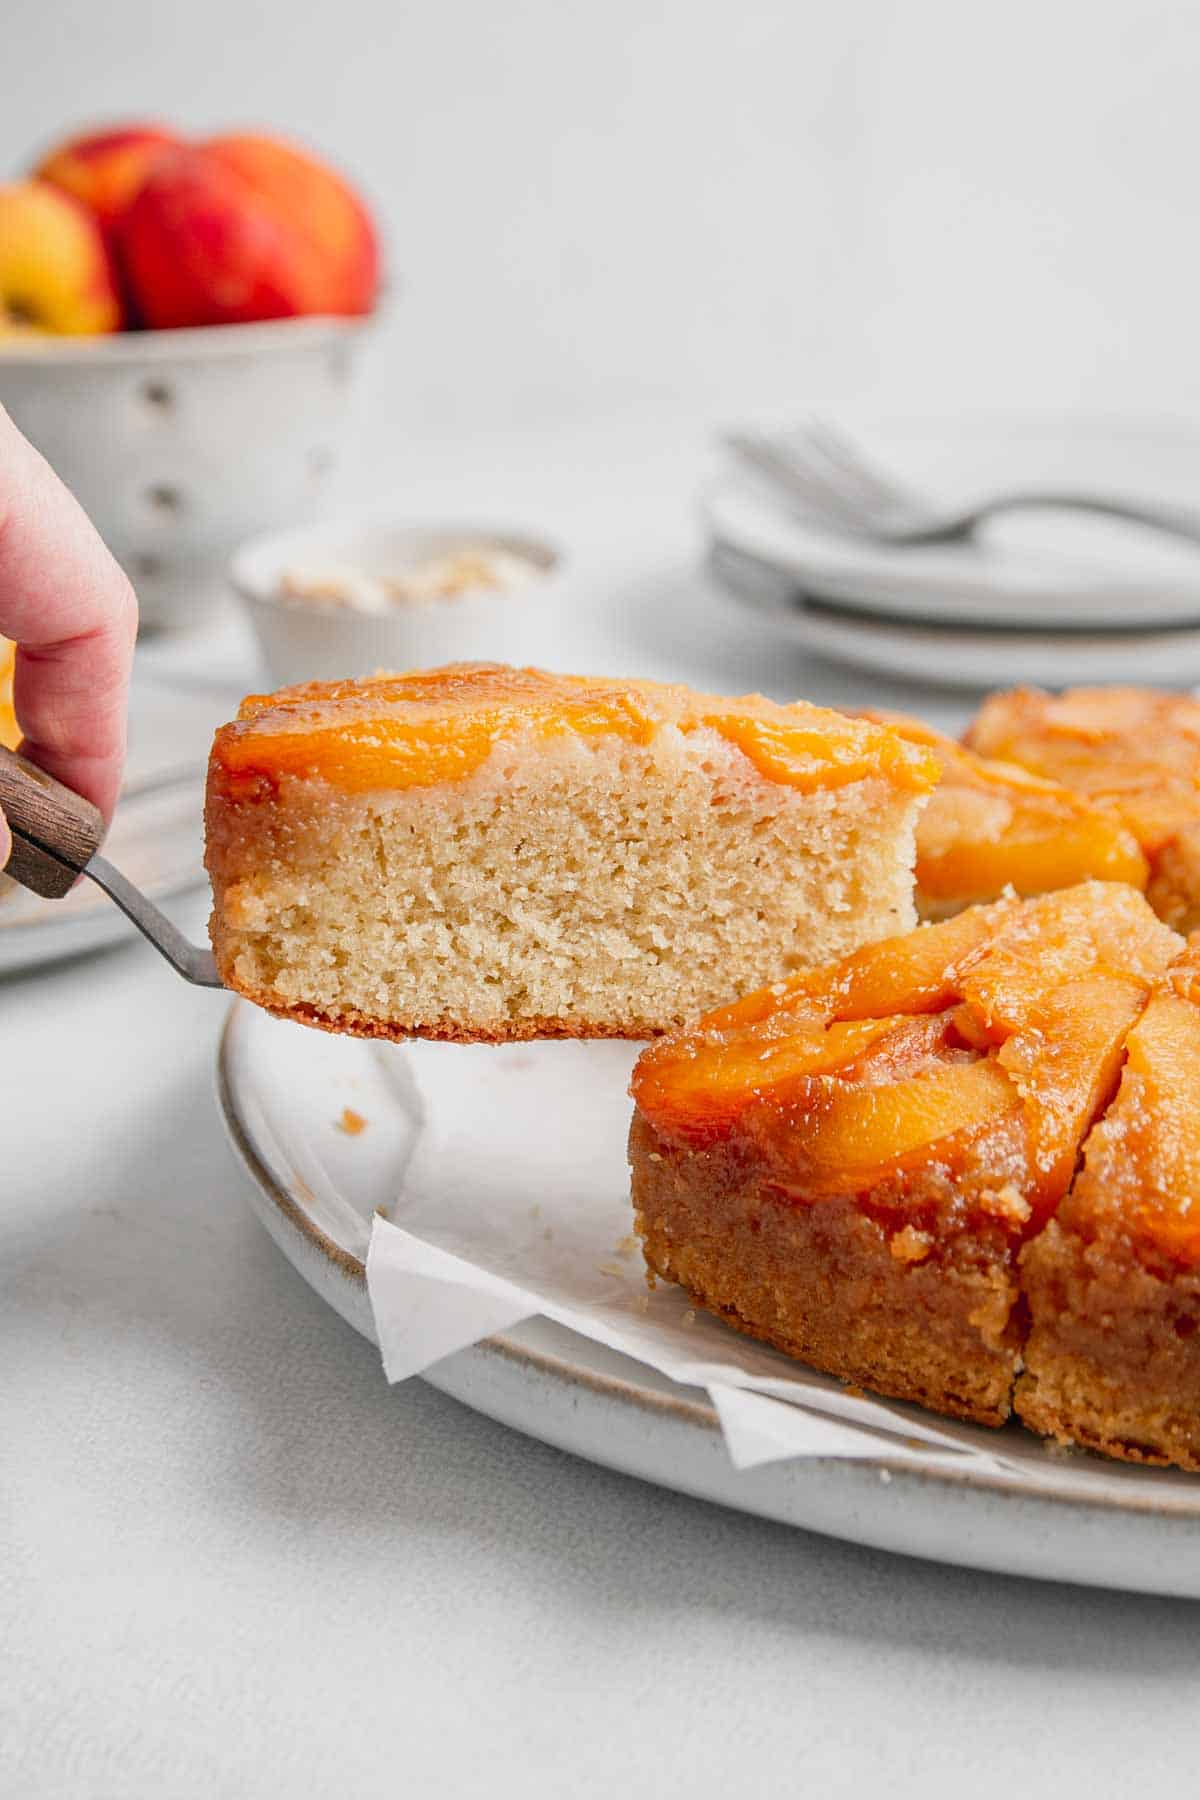 A slice of gluten free peach cake is lifted with a spatula from the rest of the cake.